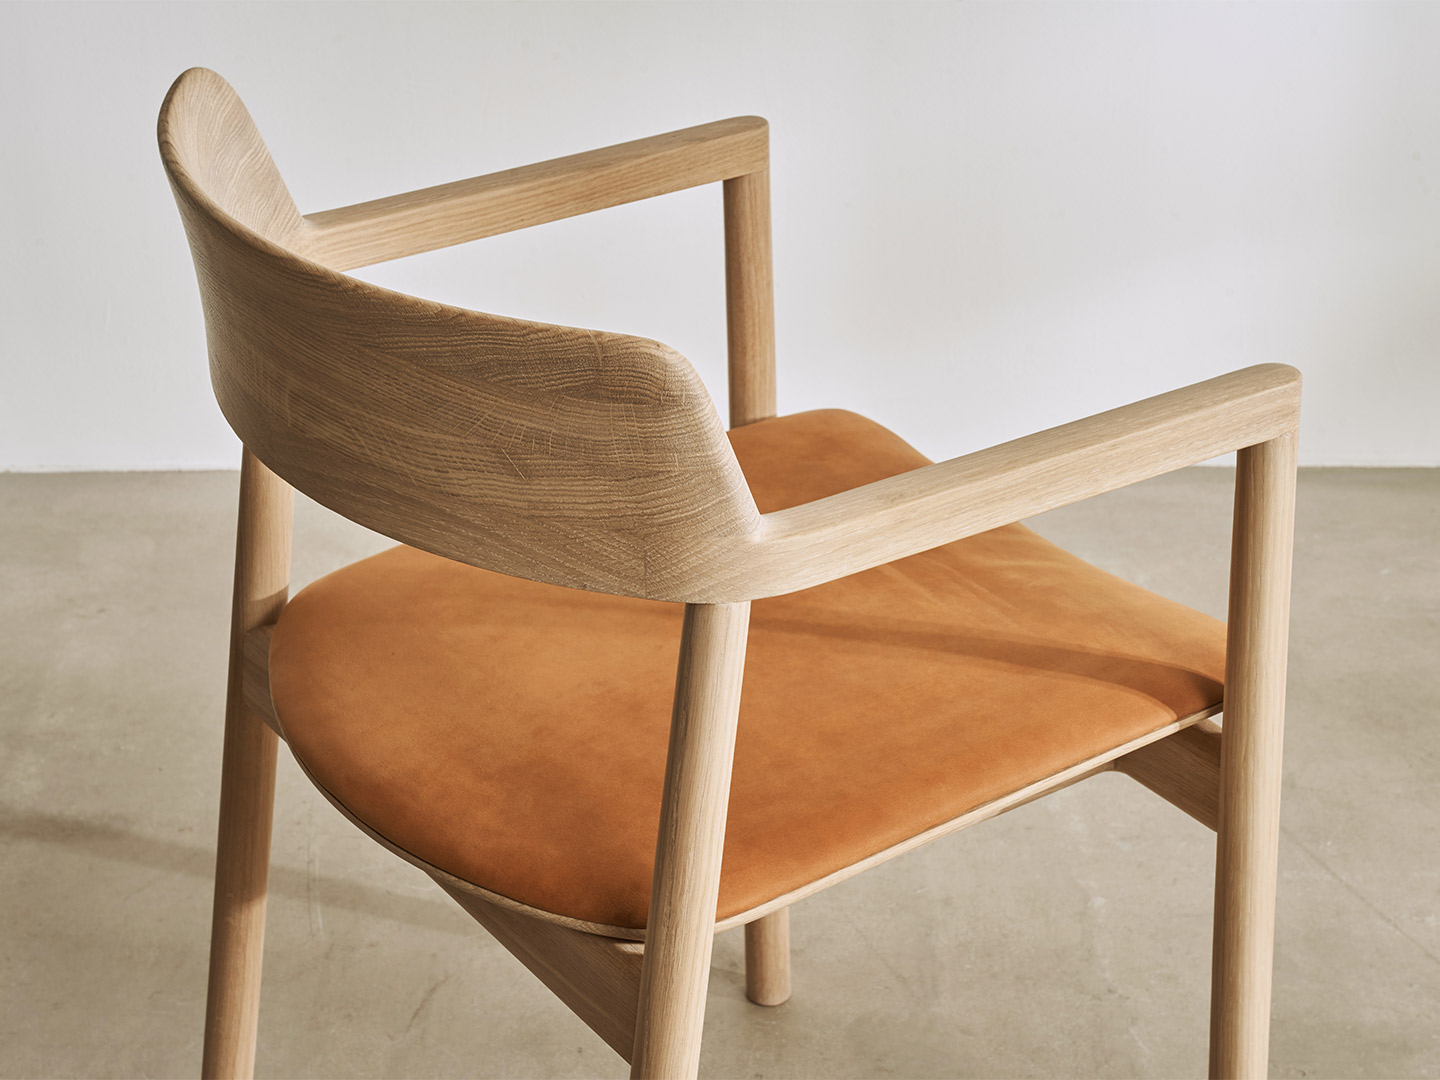 OVO furniture collection by Foster + Partners for Benchmark